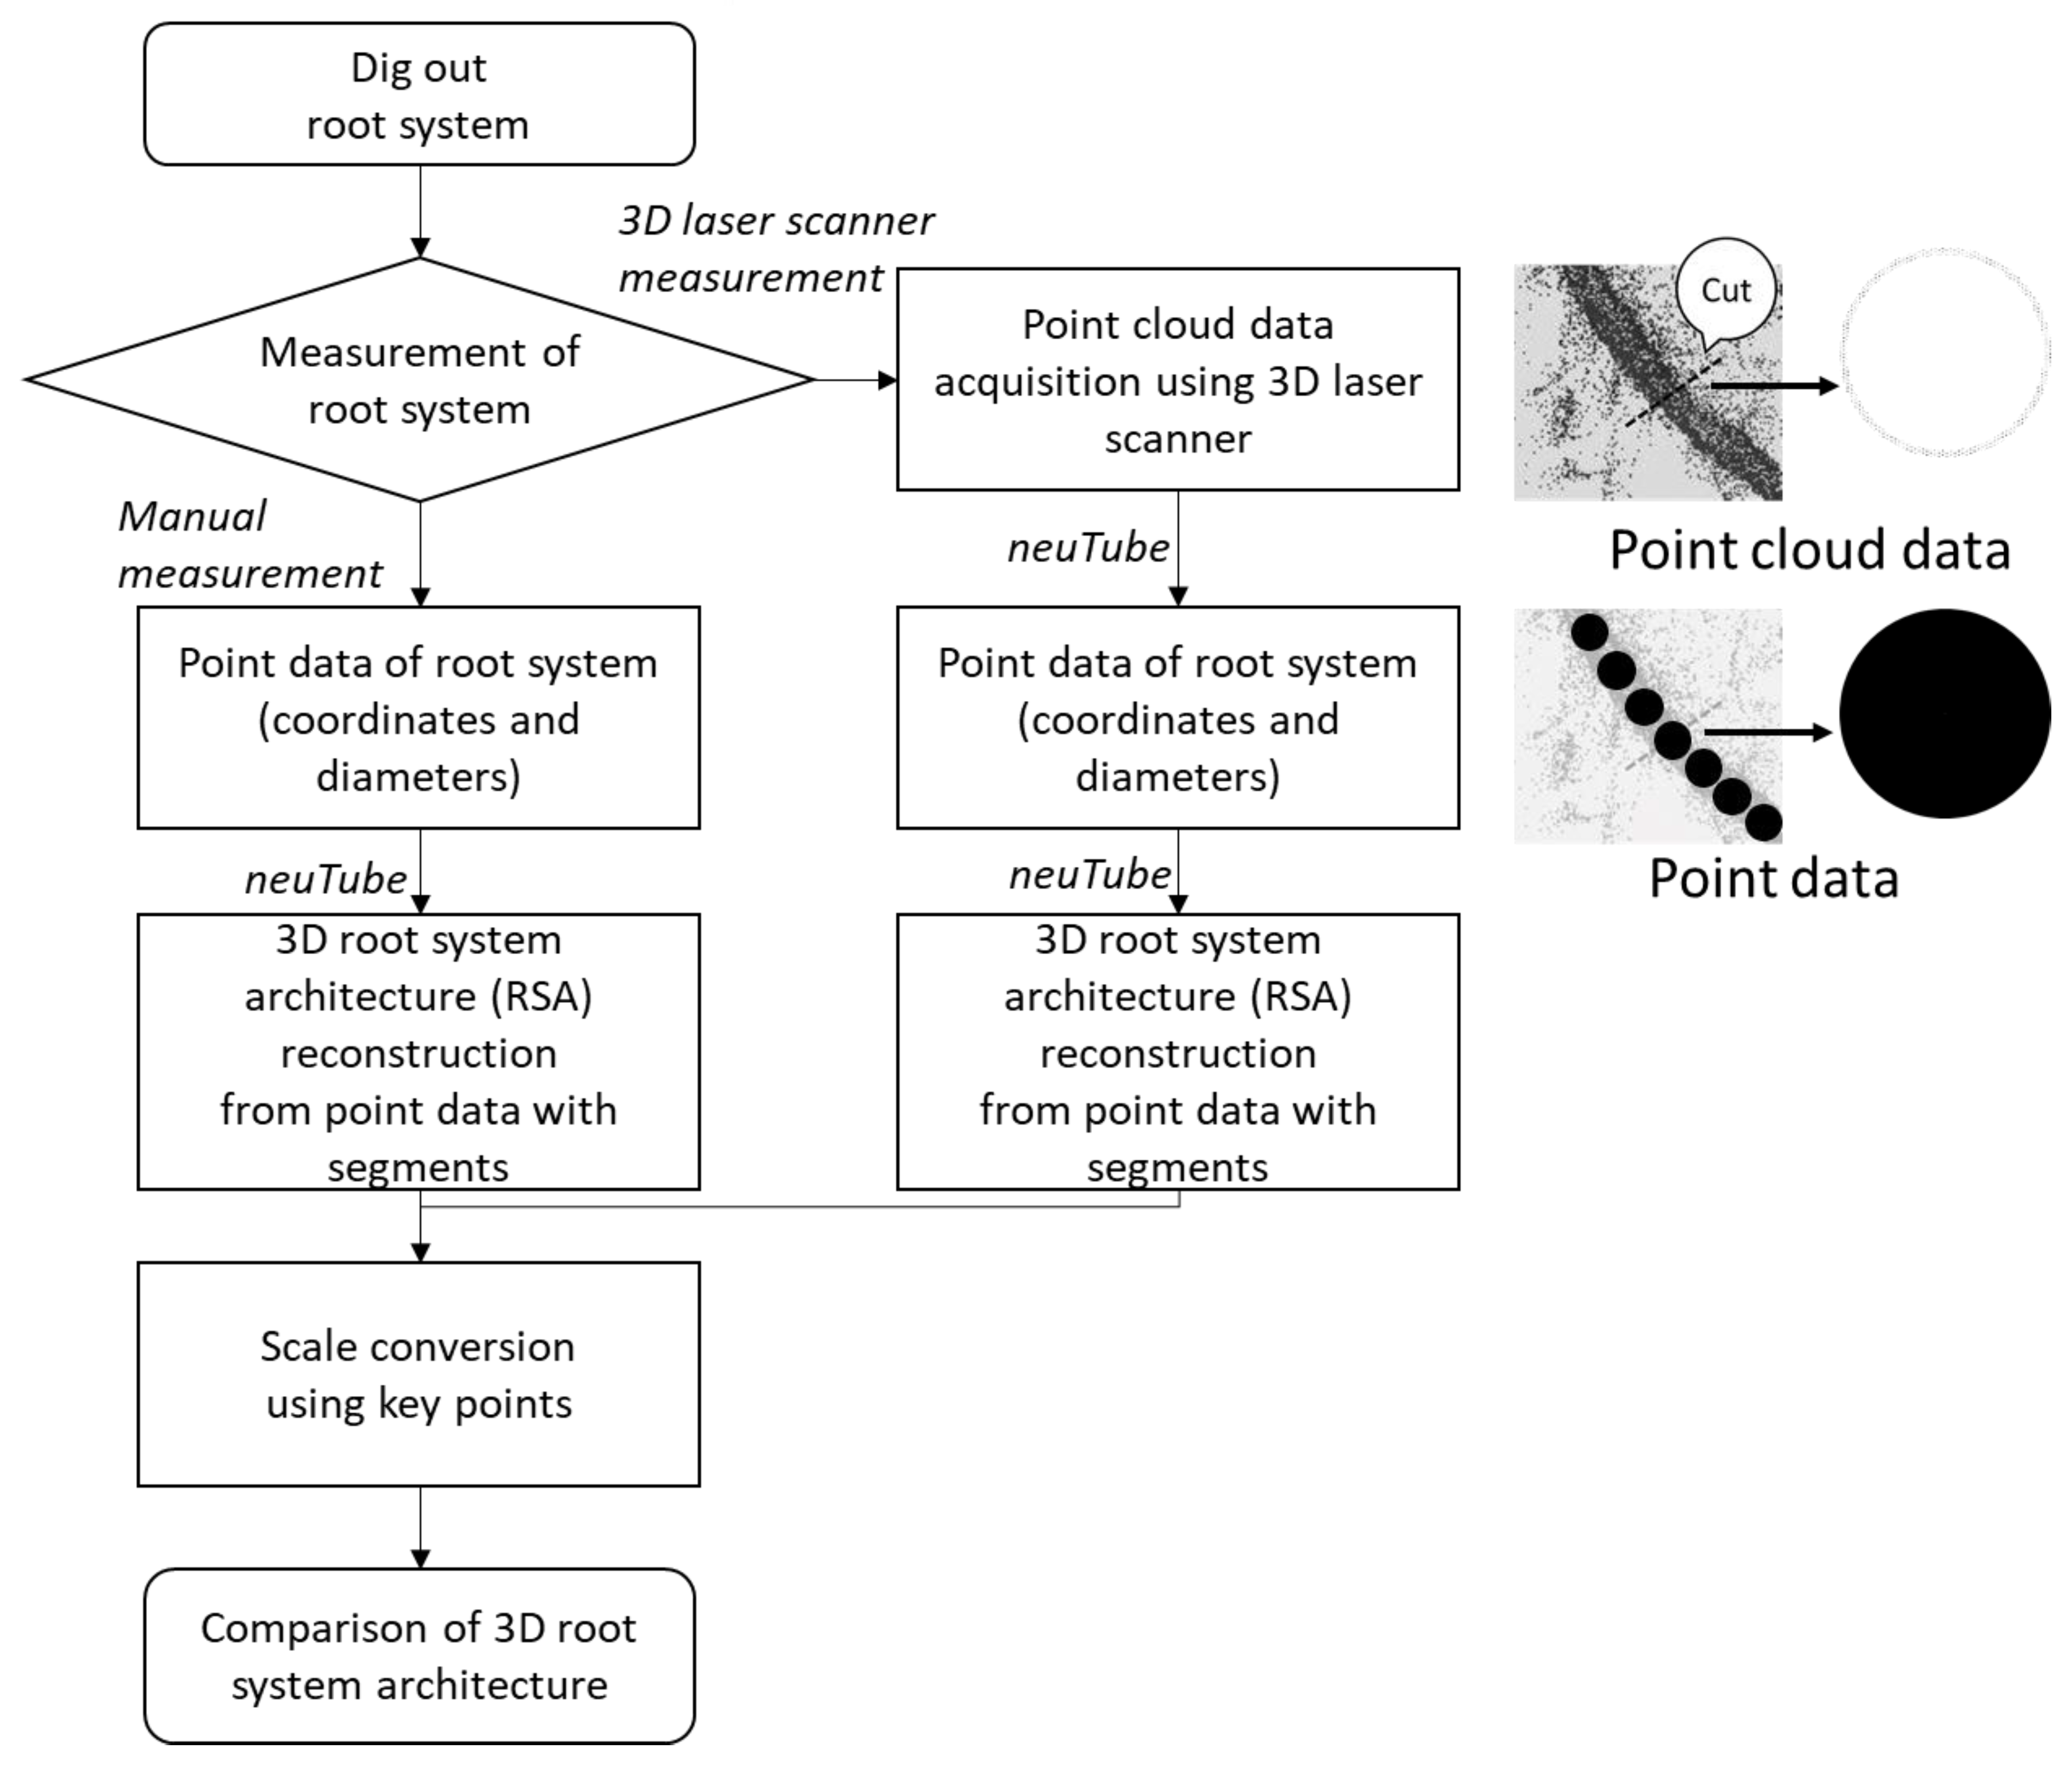 Forests | Free Full-Text | Reconstruction of Conifer Root Systems Mapped  with Point Cloud Data Obtained by 3D Laser Scanning Compared with Manual  Measurement | HTML